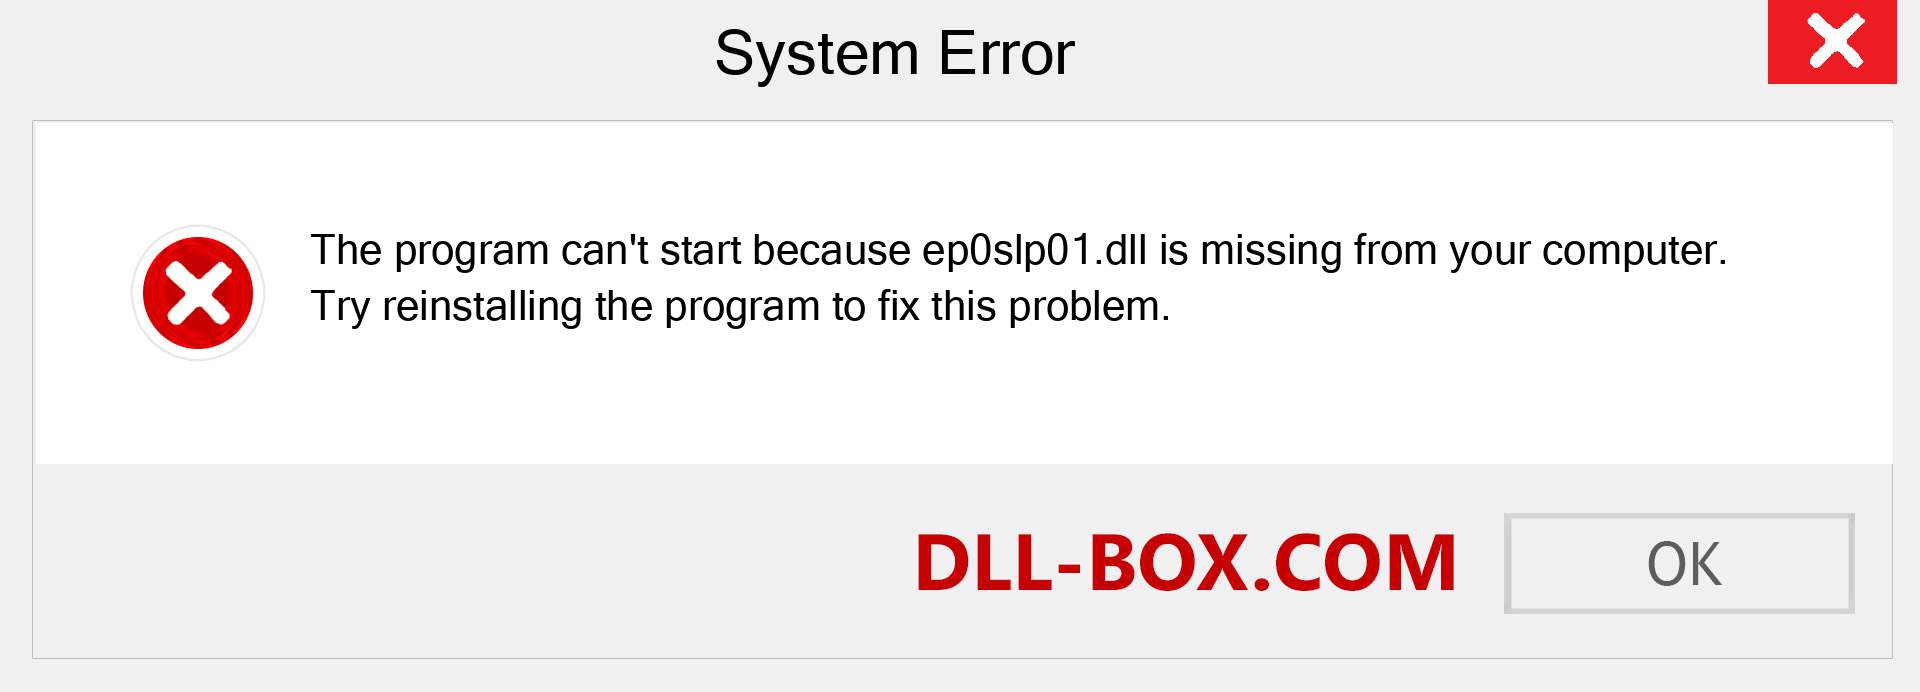  ep0slp01.dll file is missing?. Download for Windows 7, 8, 10 - Fix  ep0slp01 dll Missing Error on Windows, photos, images